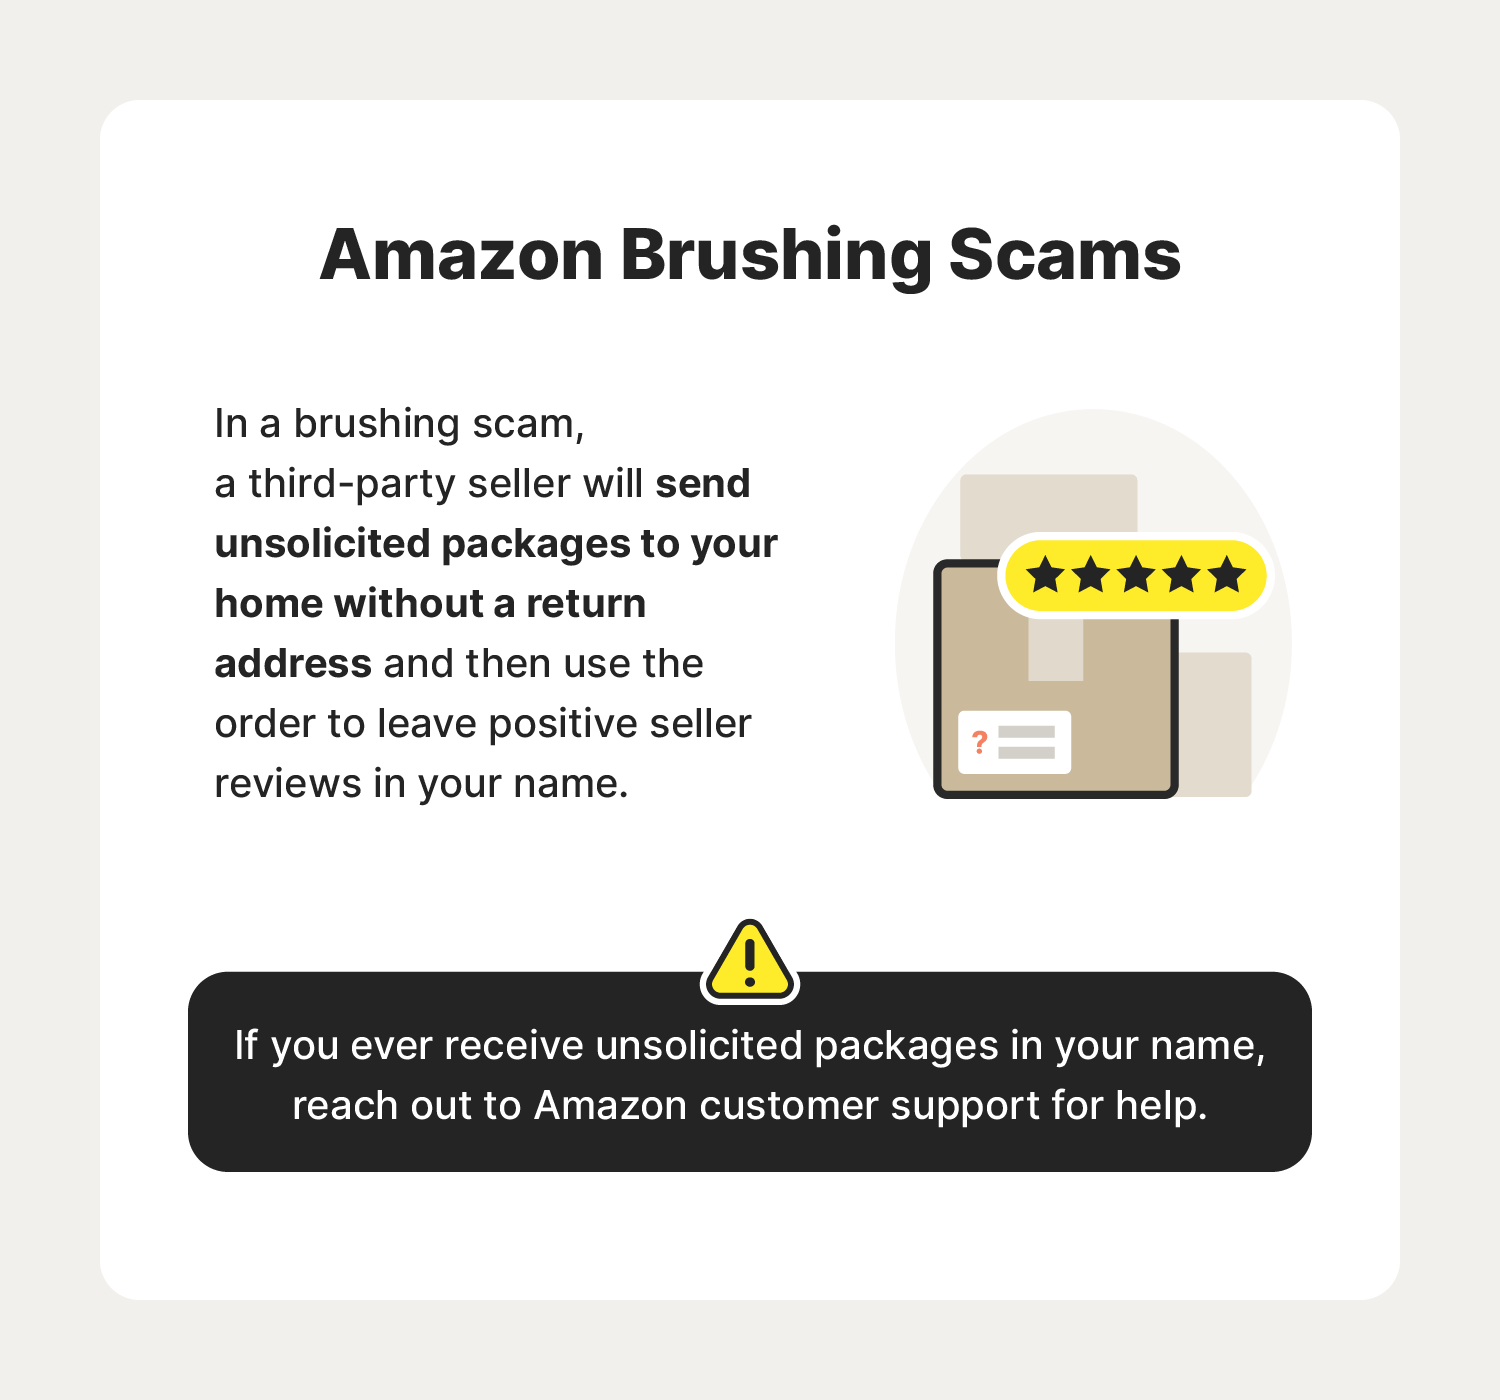 A graphic showcases brushing scams, a popular type of Amazon scam.